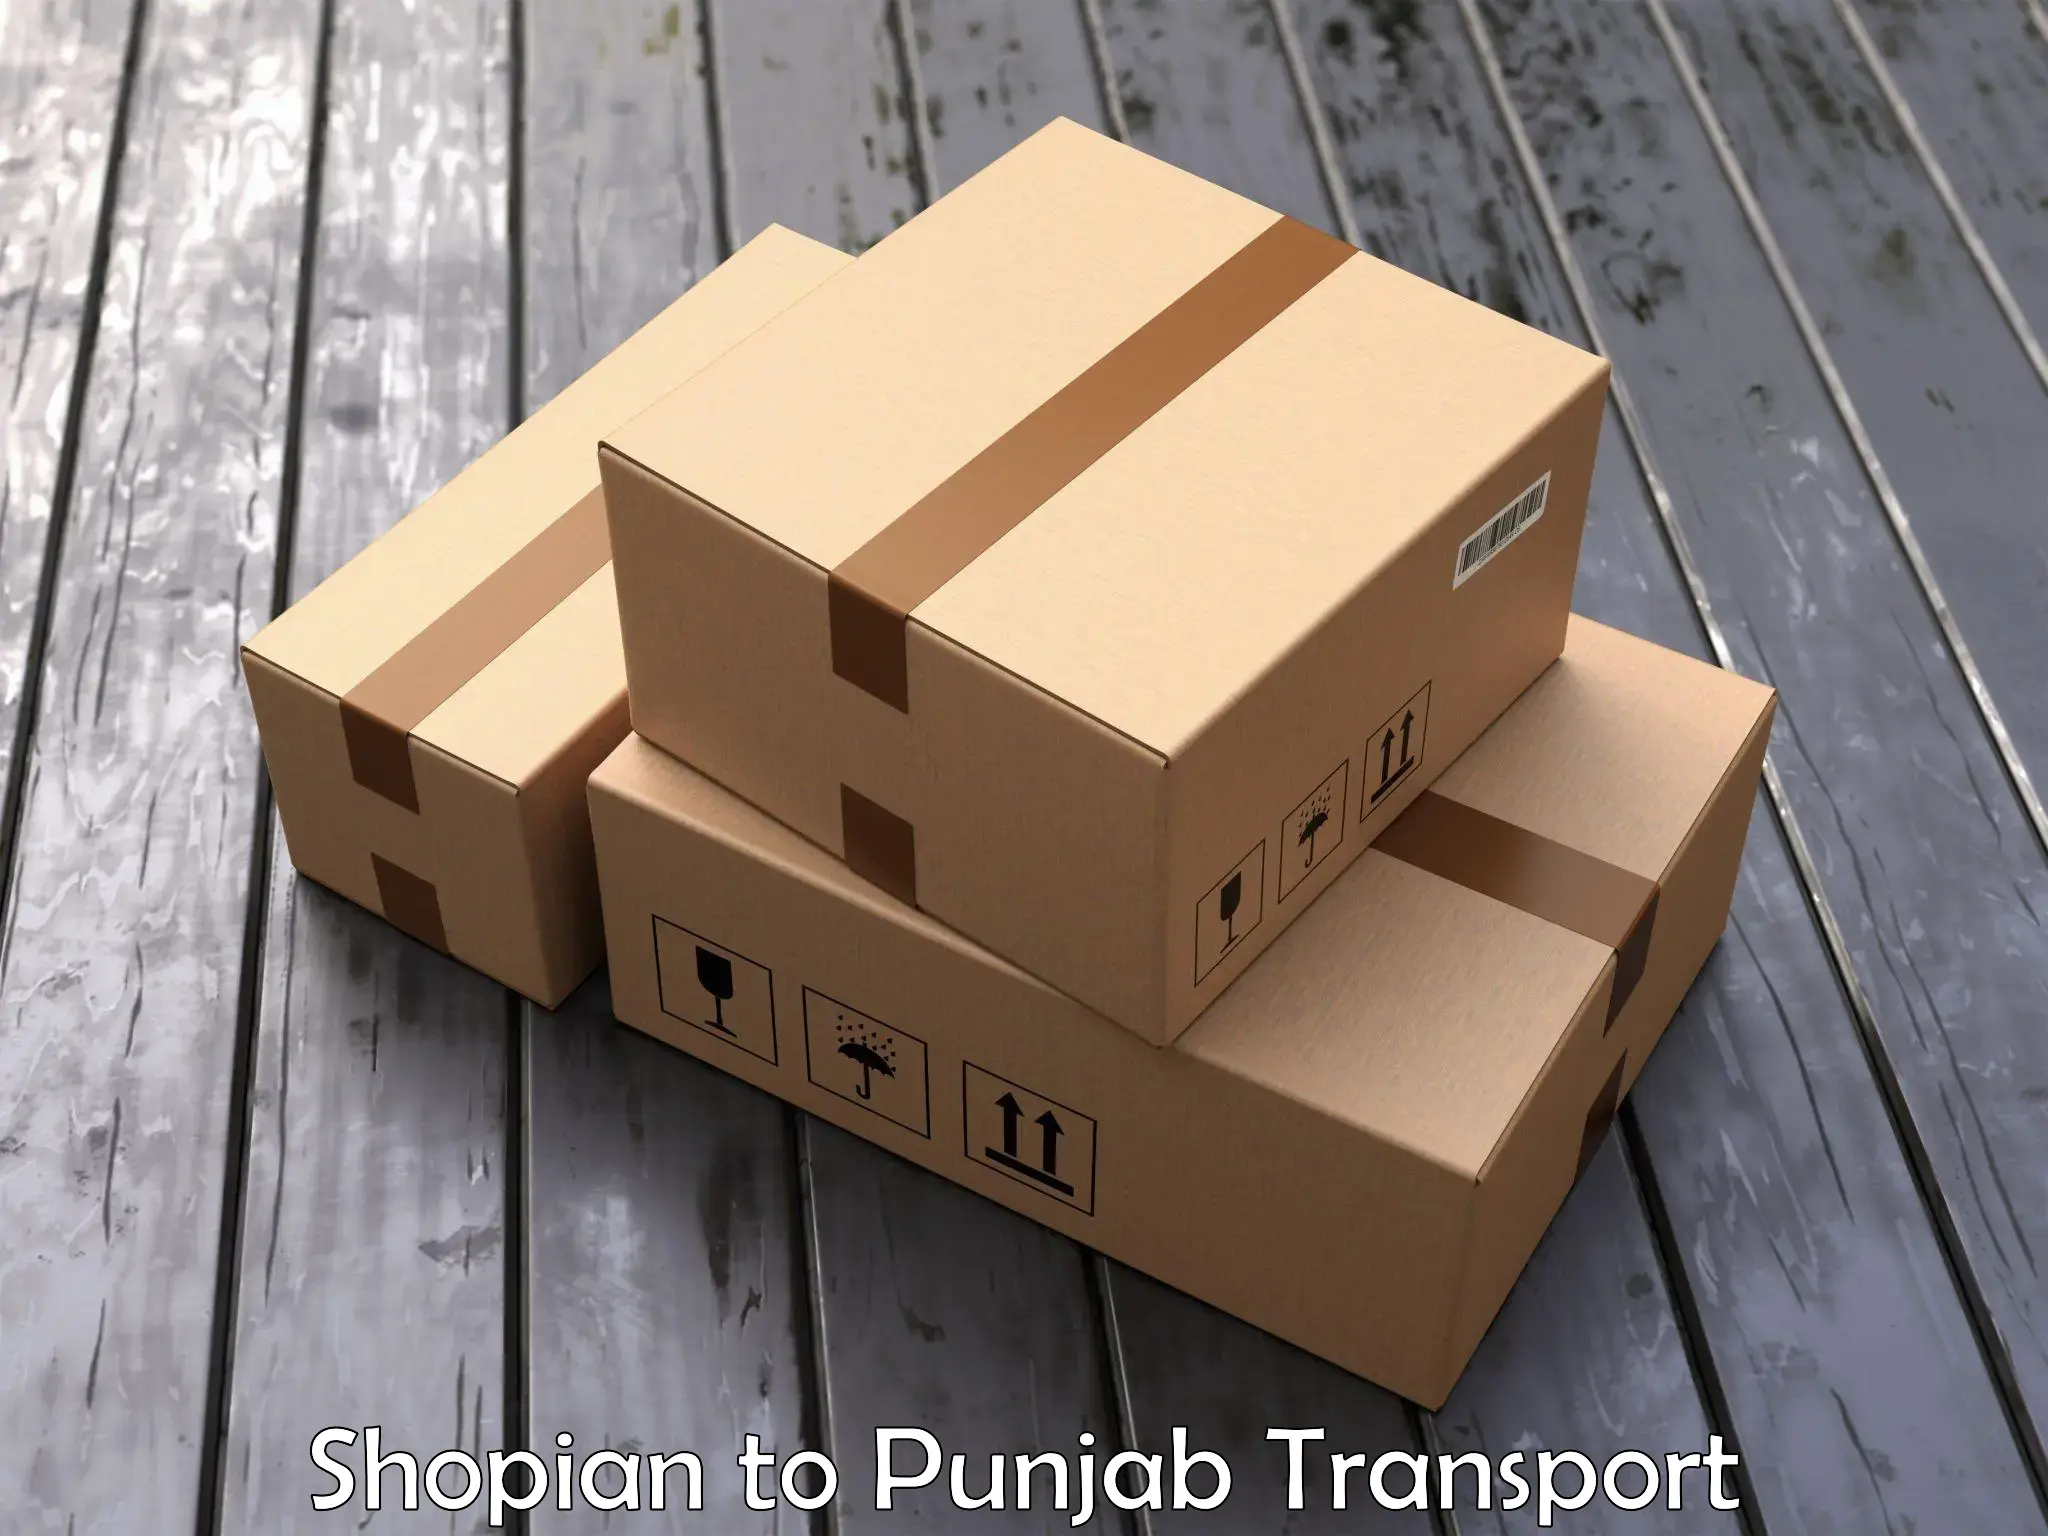 Container transport service Shopian to IIT Ropar